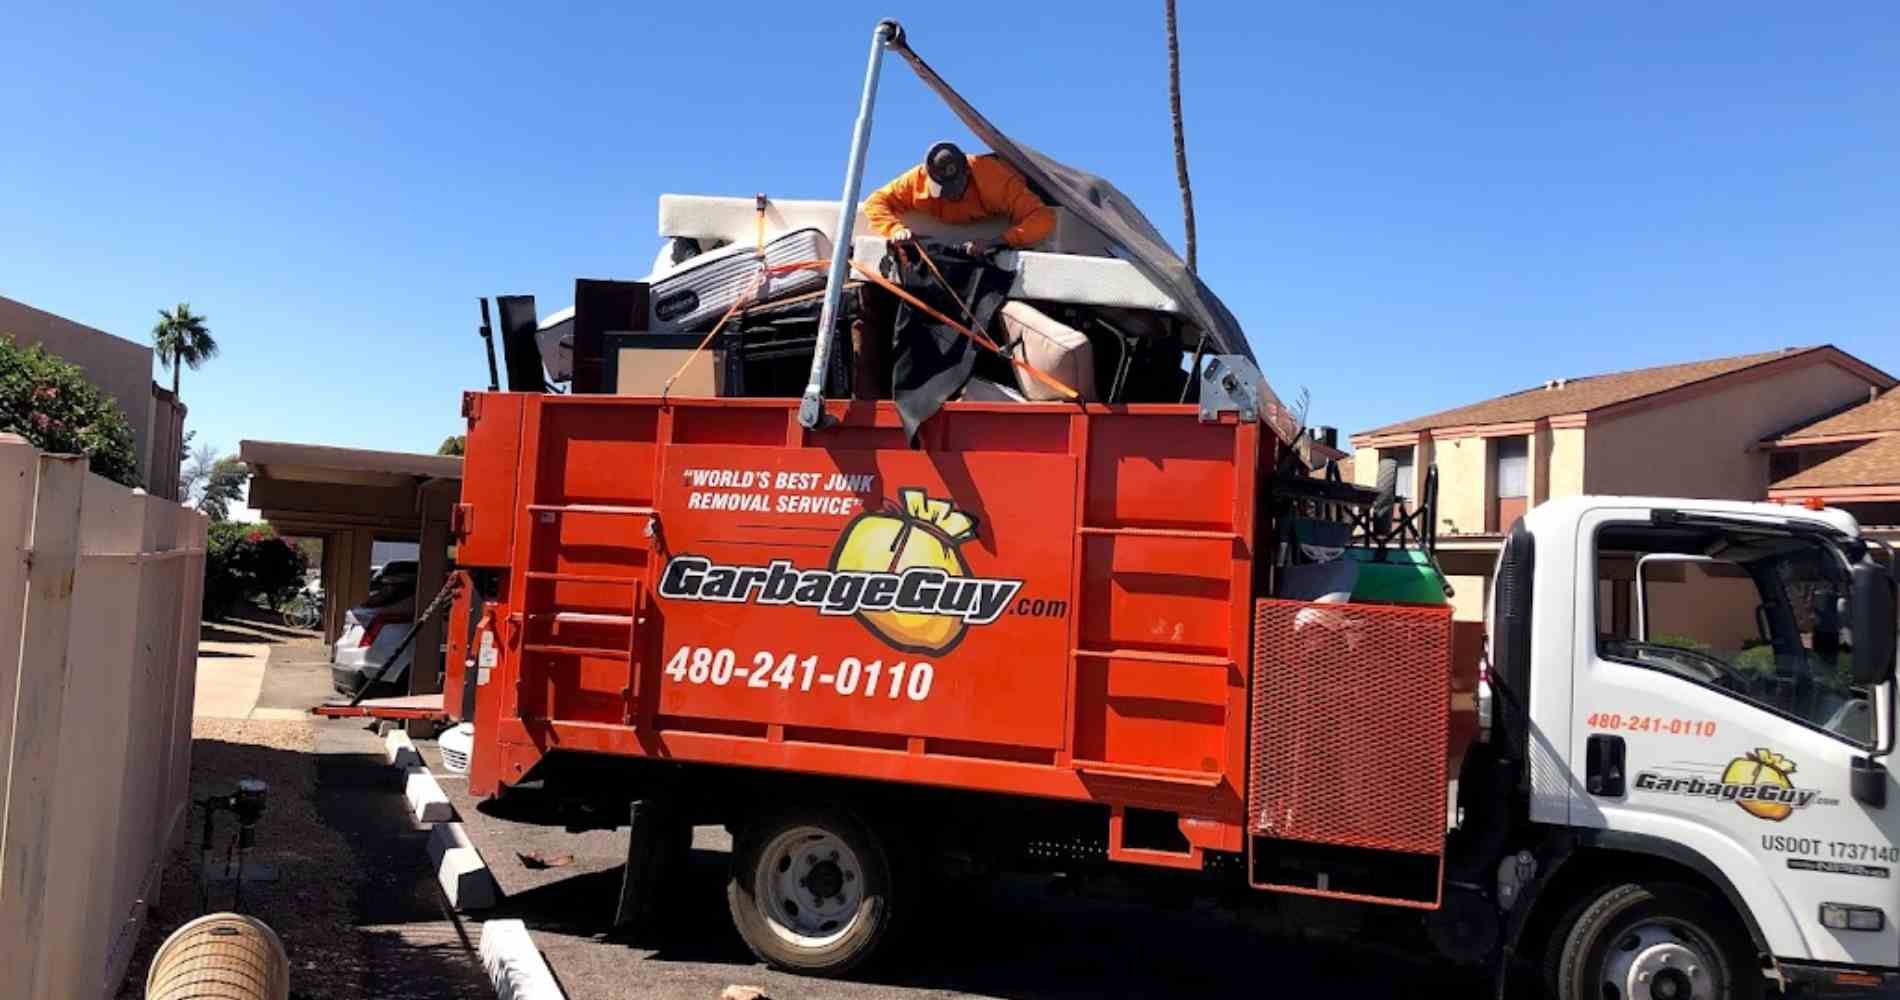 #1 for Furniture Removal in Sun City West, AZ With Over 1200 5-Star Reviews!